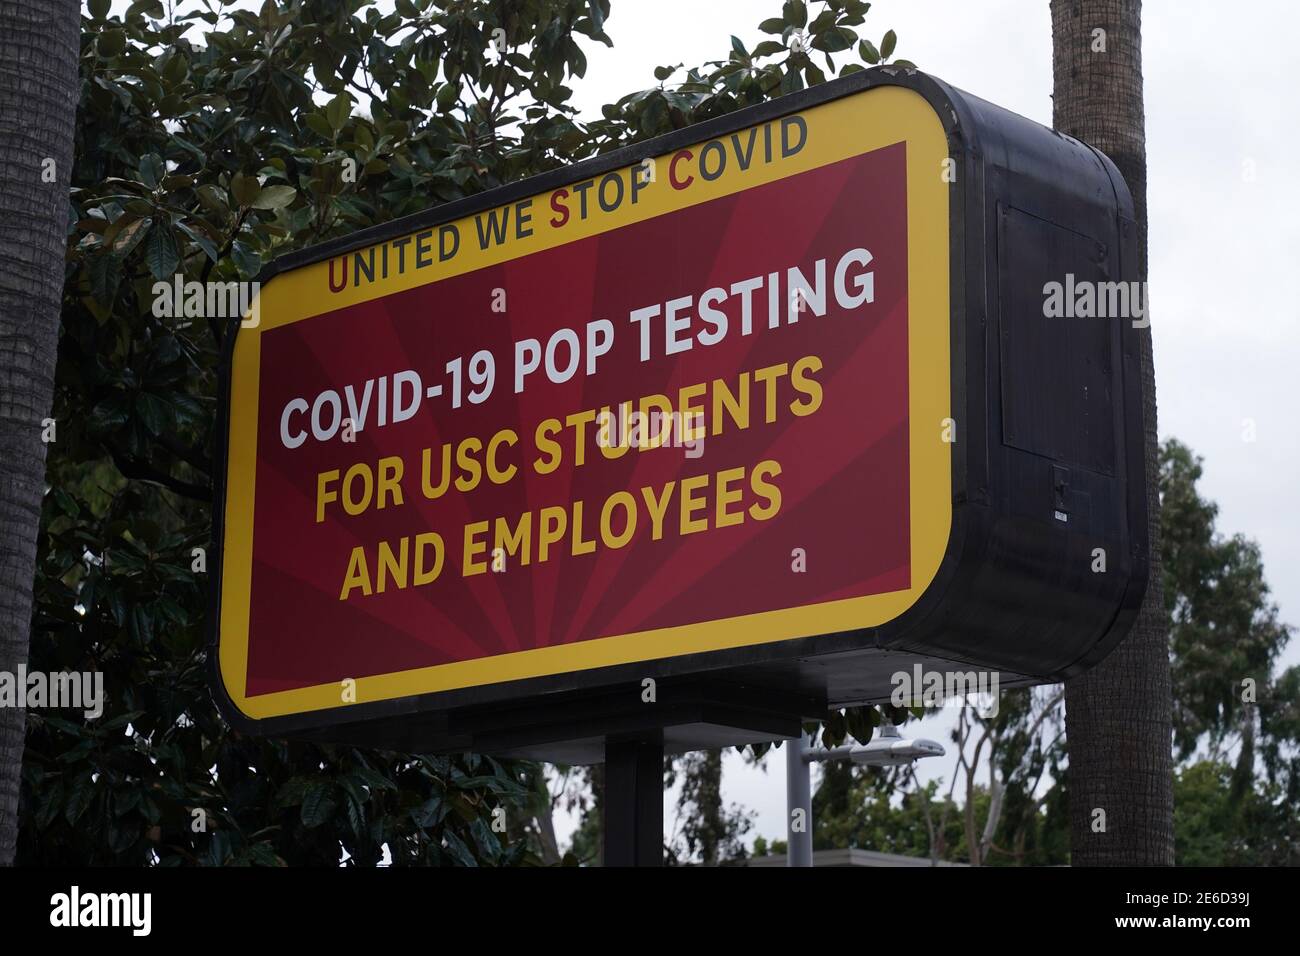 A COVID-19 Pop Testing site at the University of Southern California for students and employees, Thursday, Jan. 28, 2021, in Los Angeles. Stock Photo